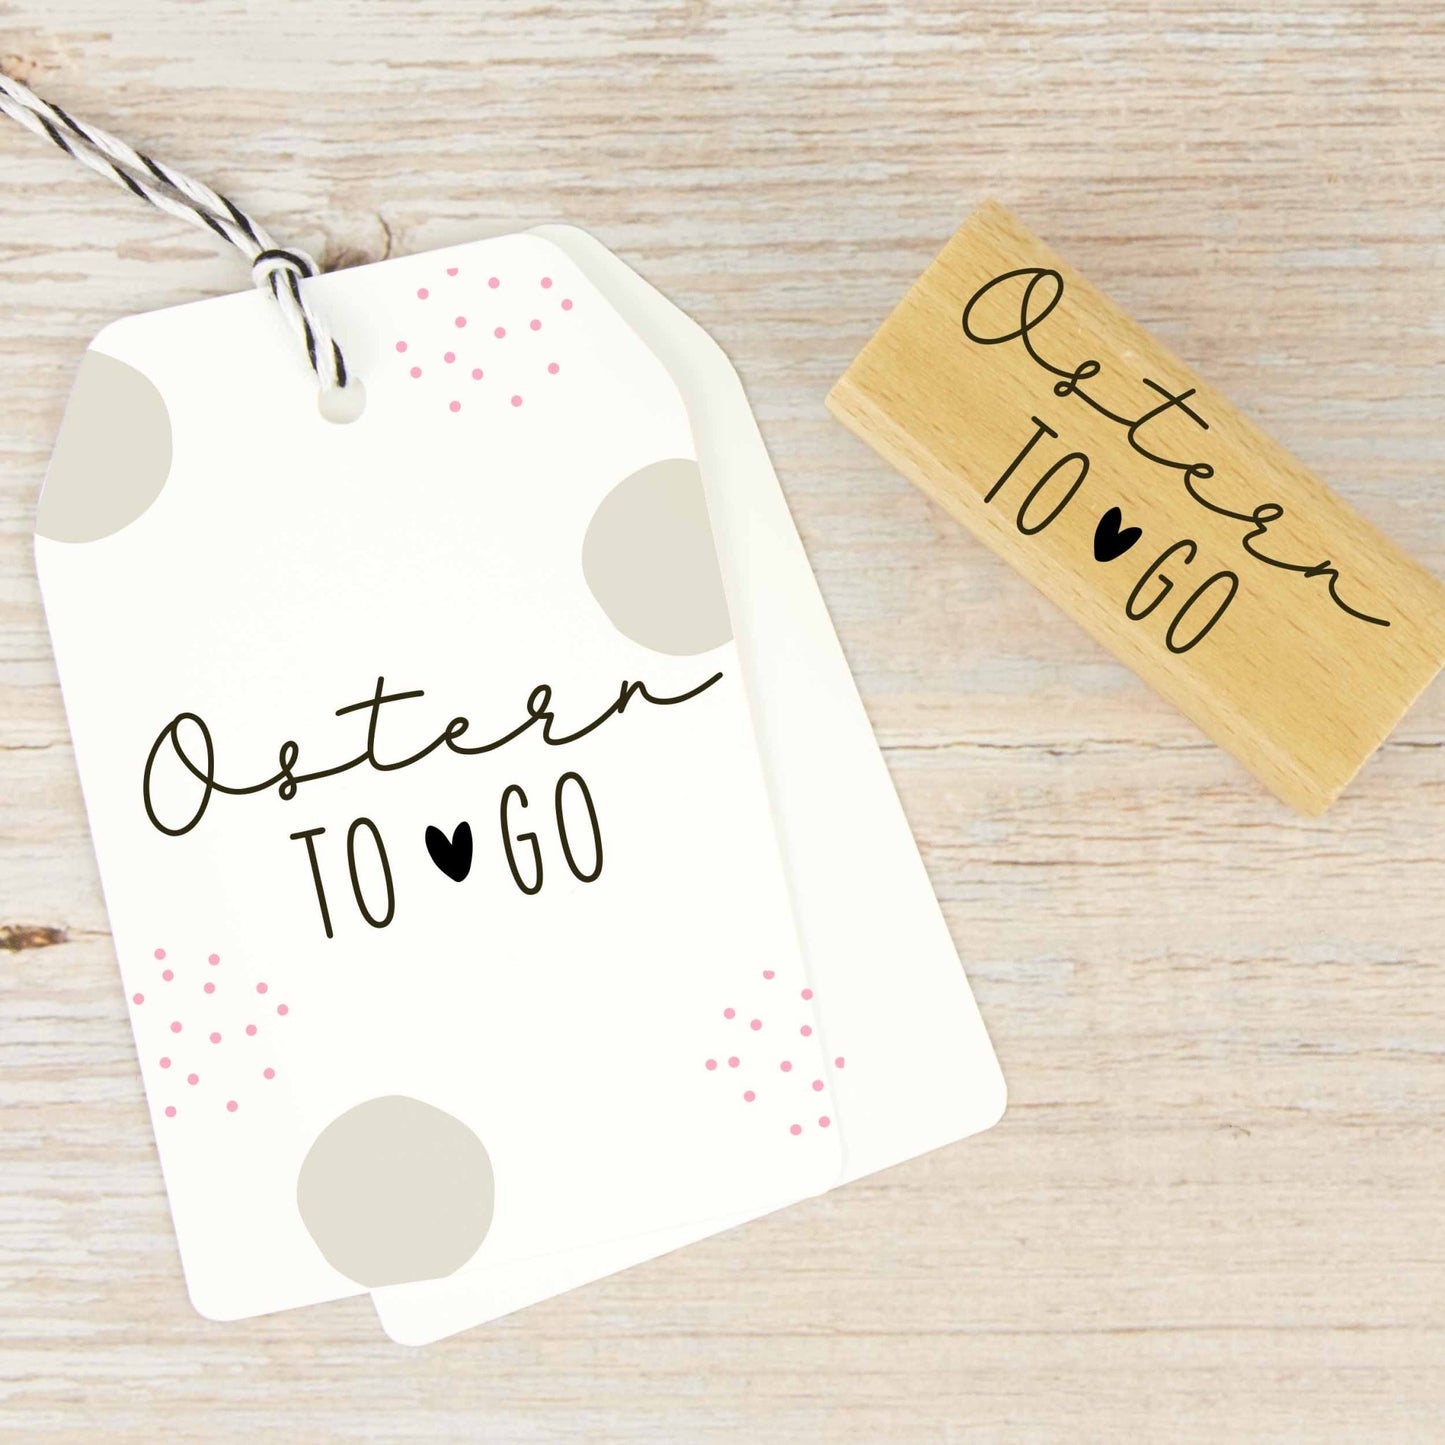 Osterstempel "Ostern to go" - IN LOVE WITH PAPER